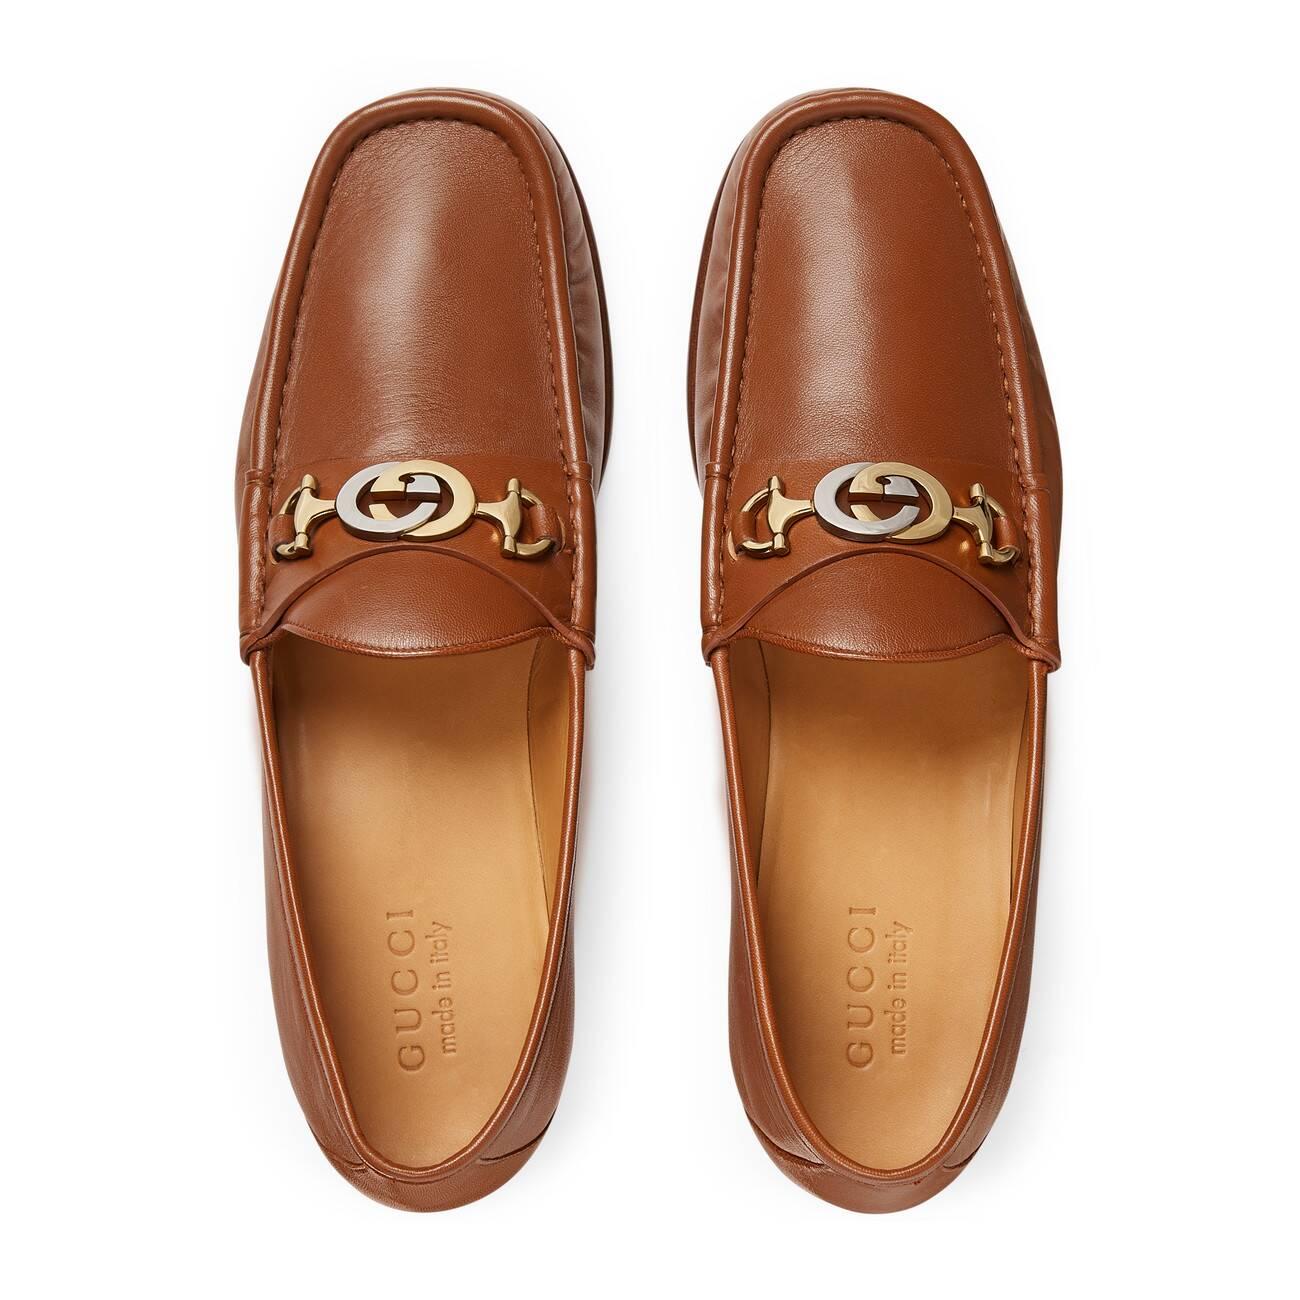 Gucci Leather Loafers With Interlocking G Horsebit in Brown for Men - Lyst